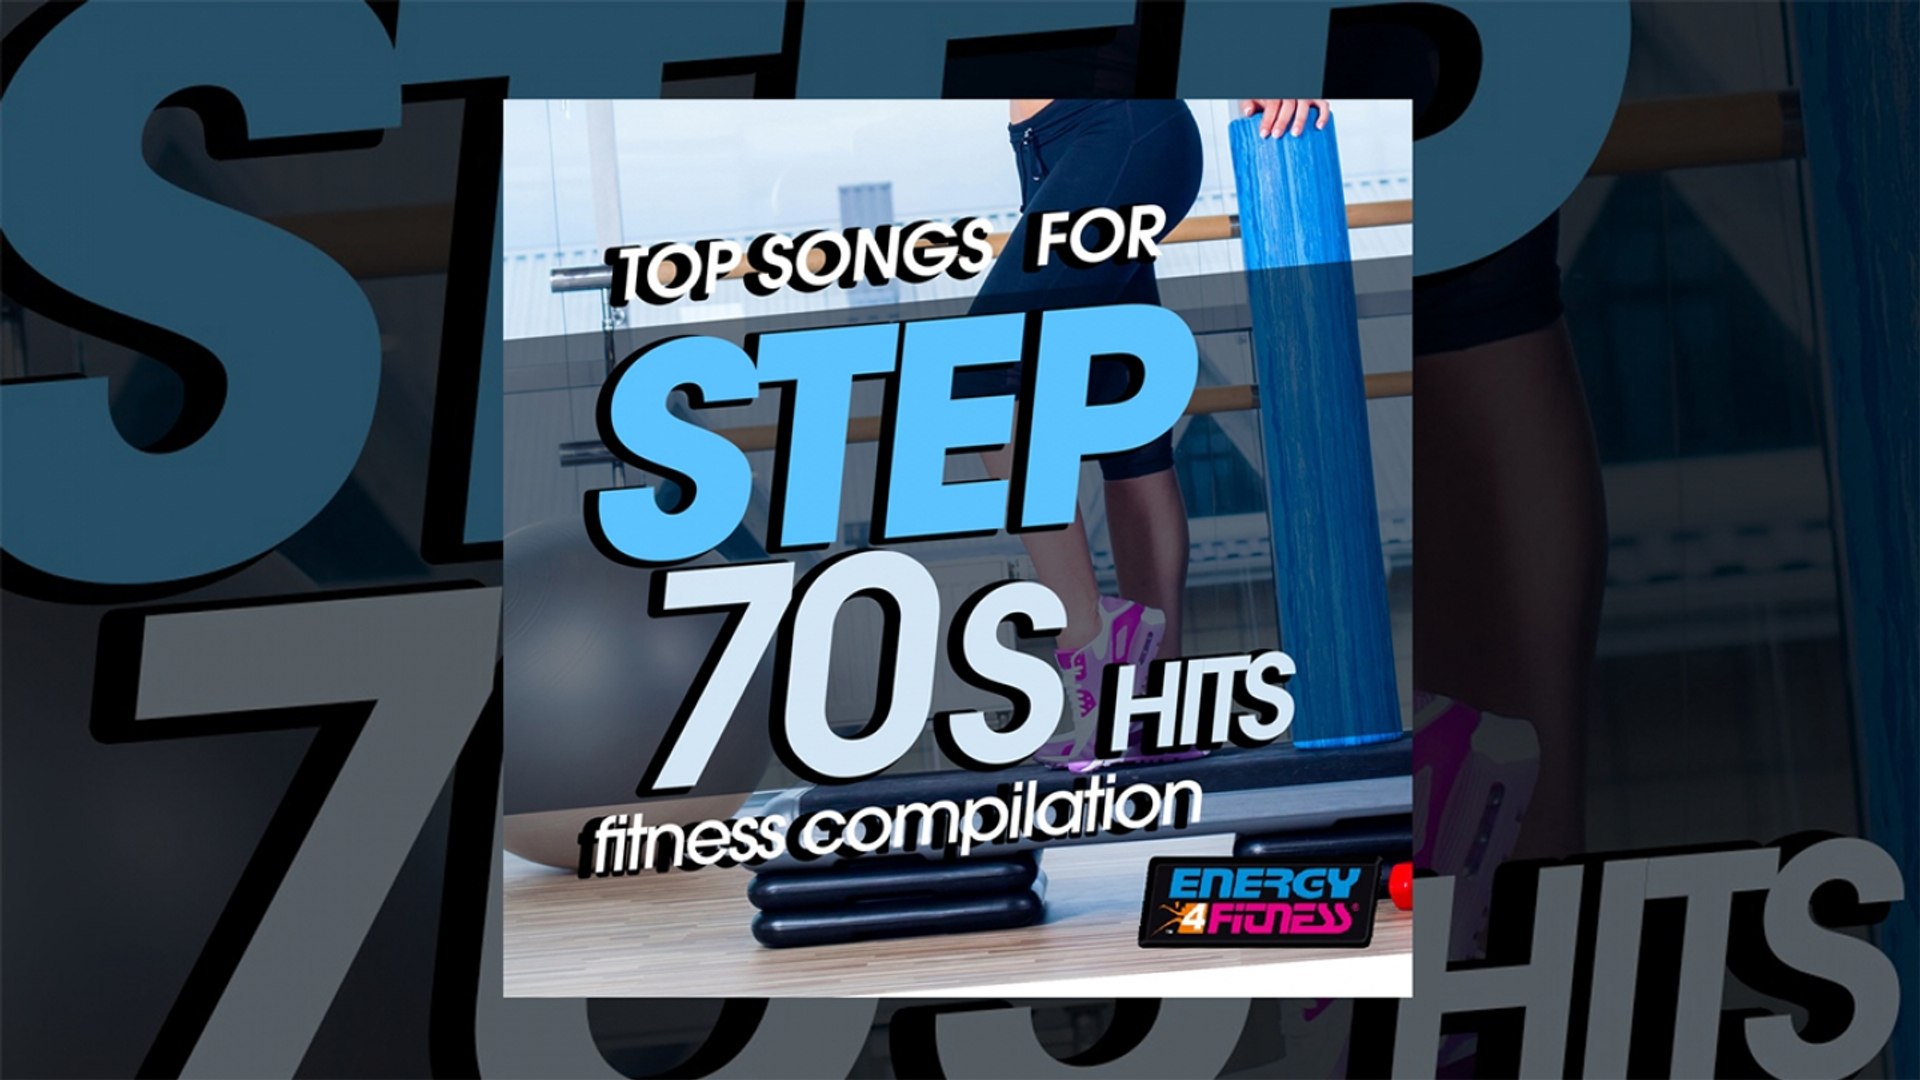 E4F - Top Songs For Step 70s Hits Fitness Compilation - Fitness & Music 2019